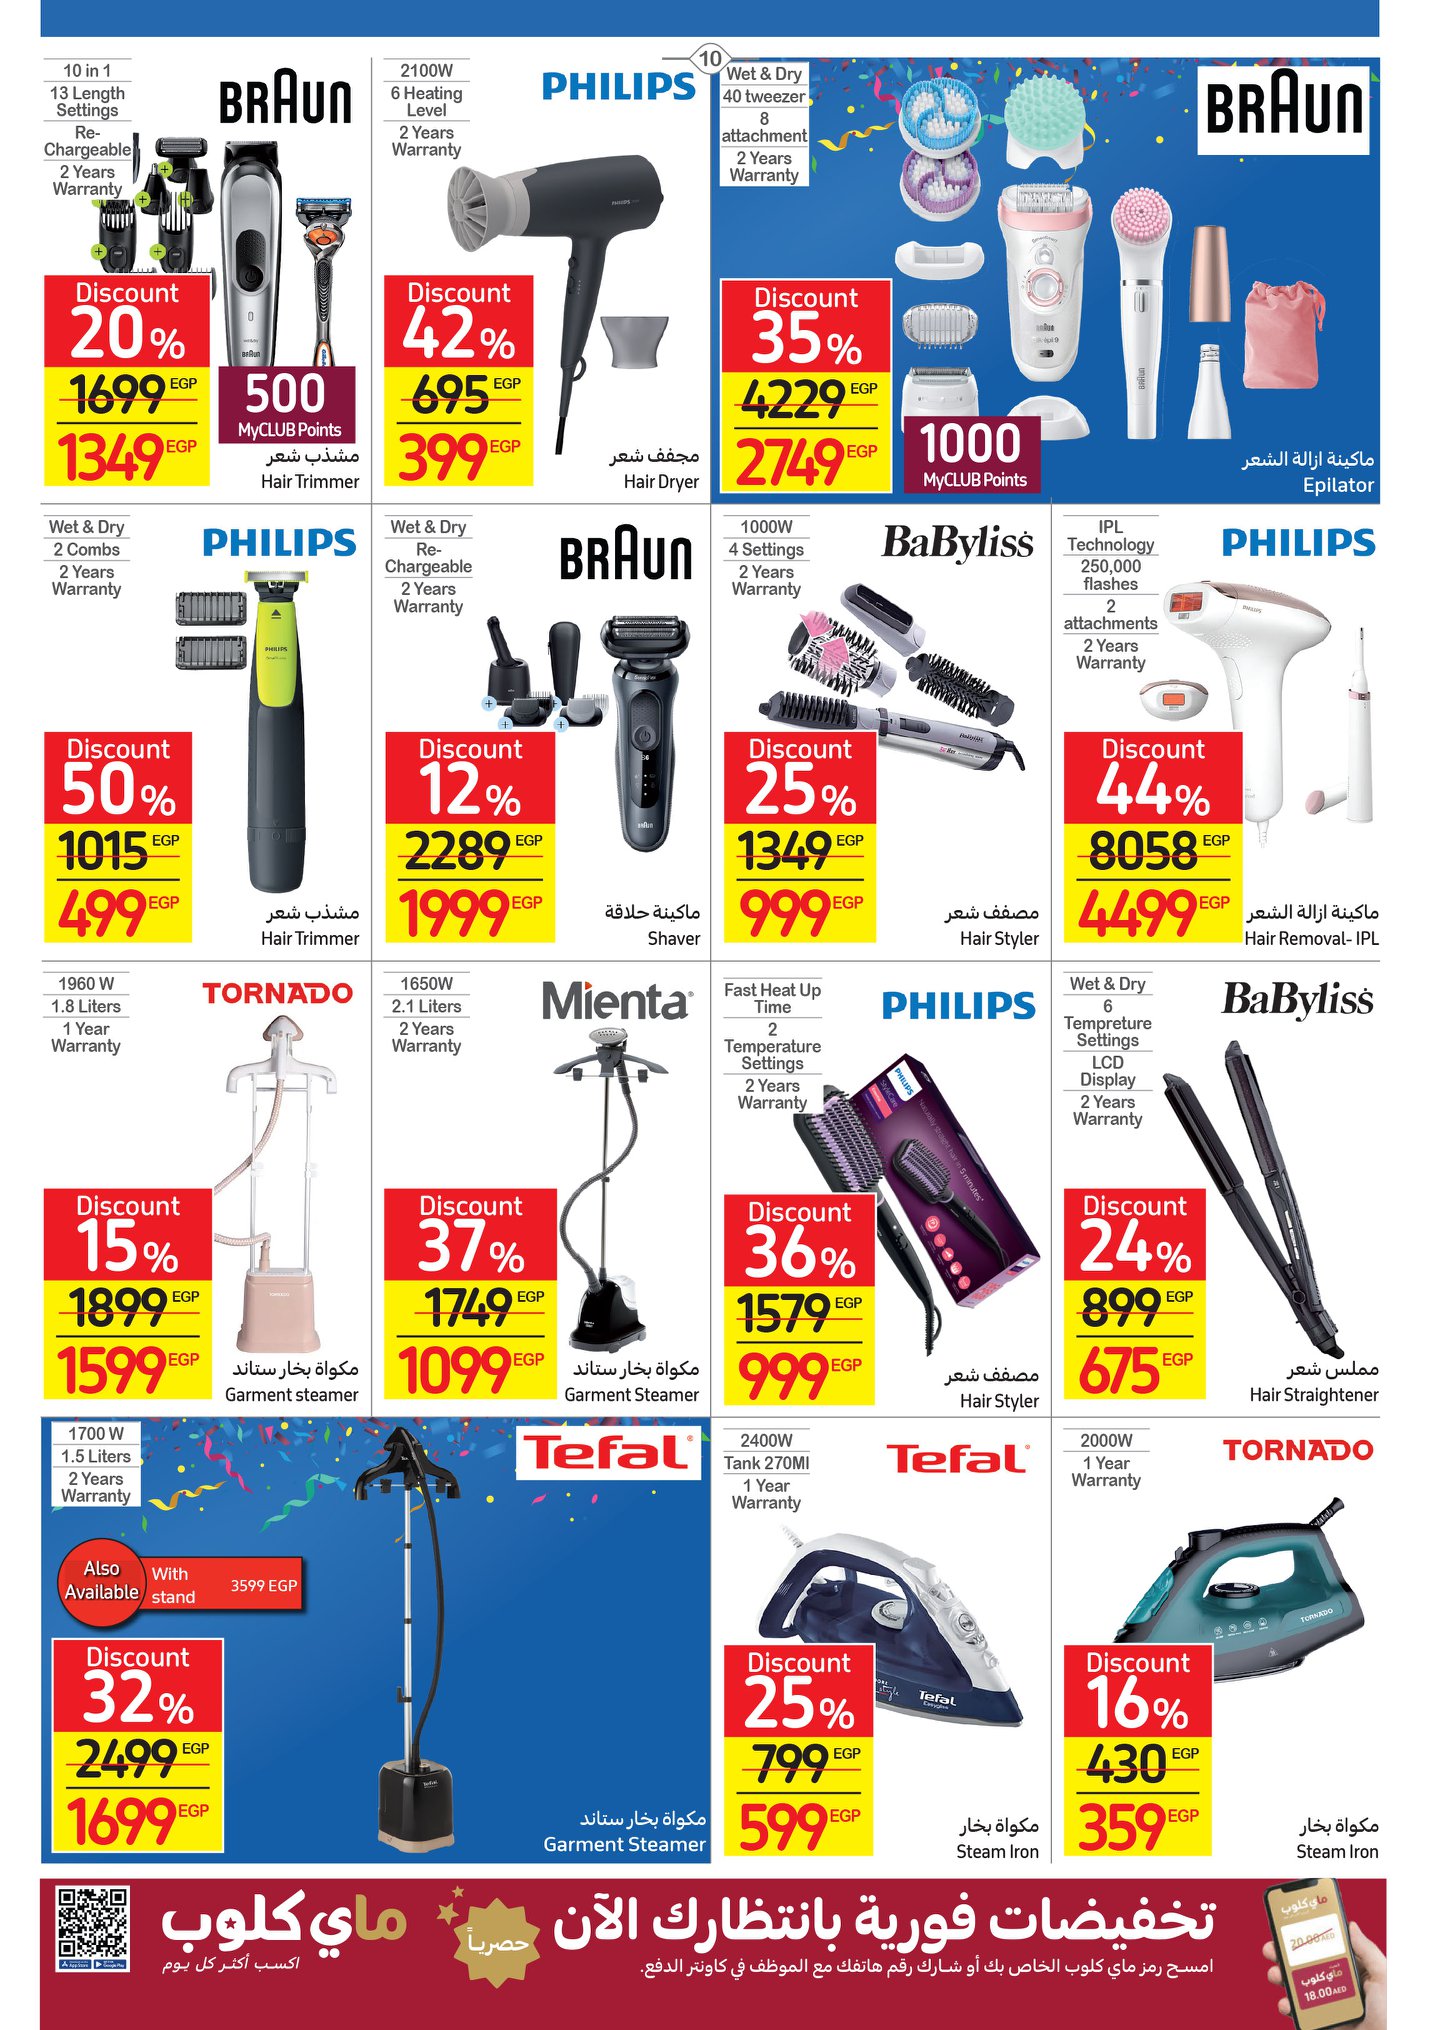 Carrefour magazine offers full 50% discounts and a surprise purchase in convenient installments without interest 12